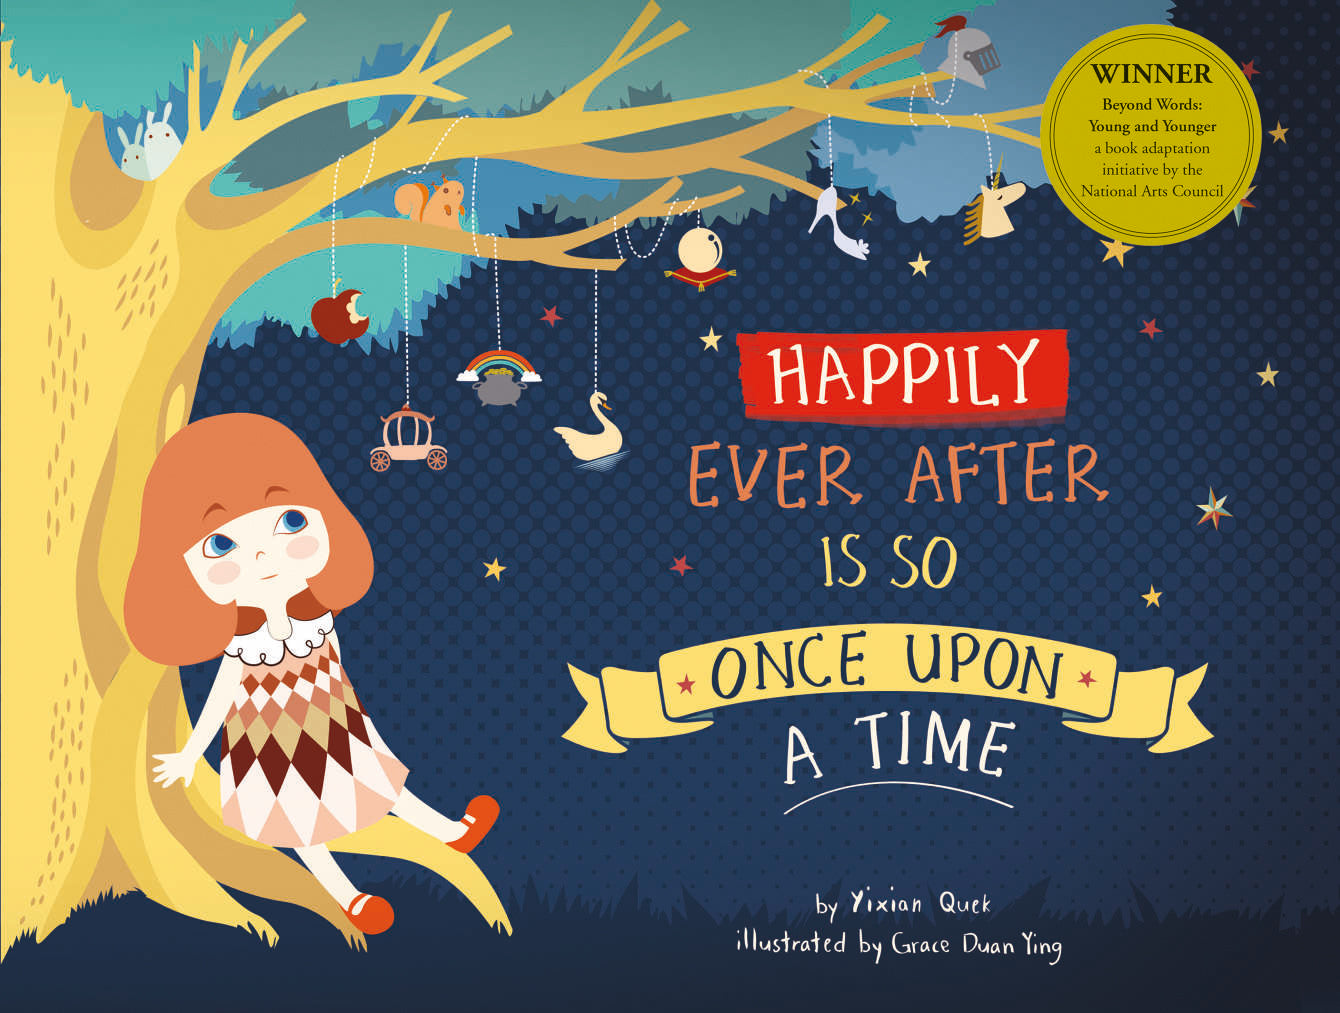 Happily Ever After is So Once Upon a Time